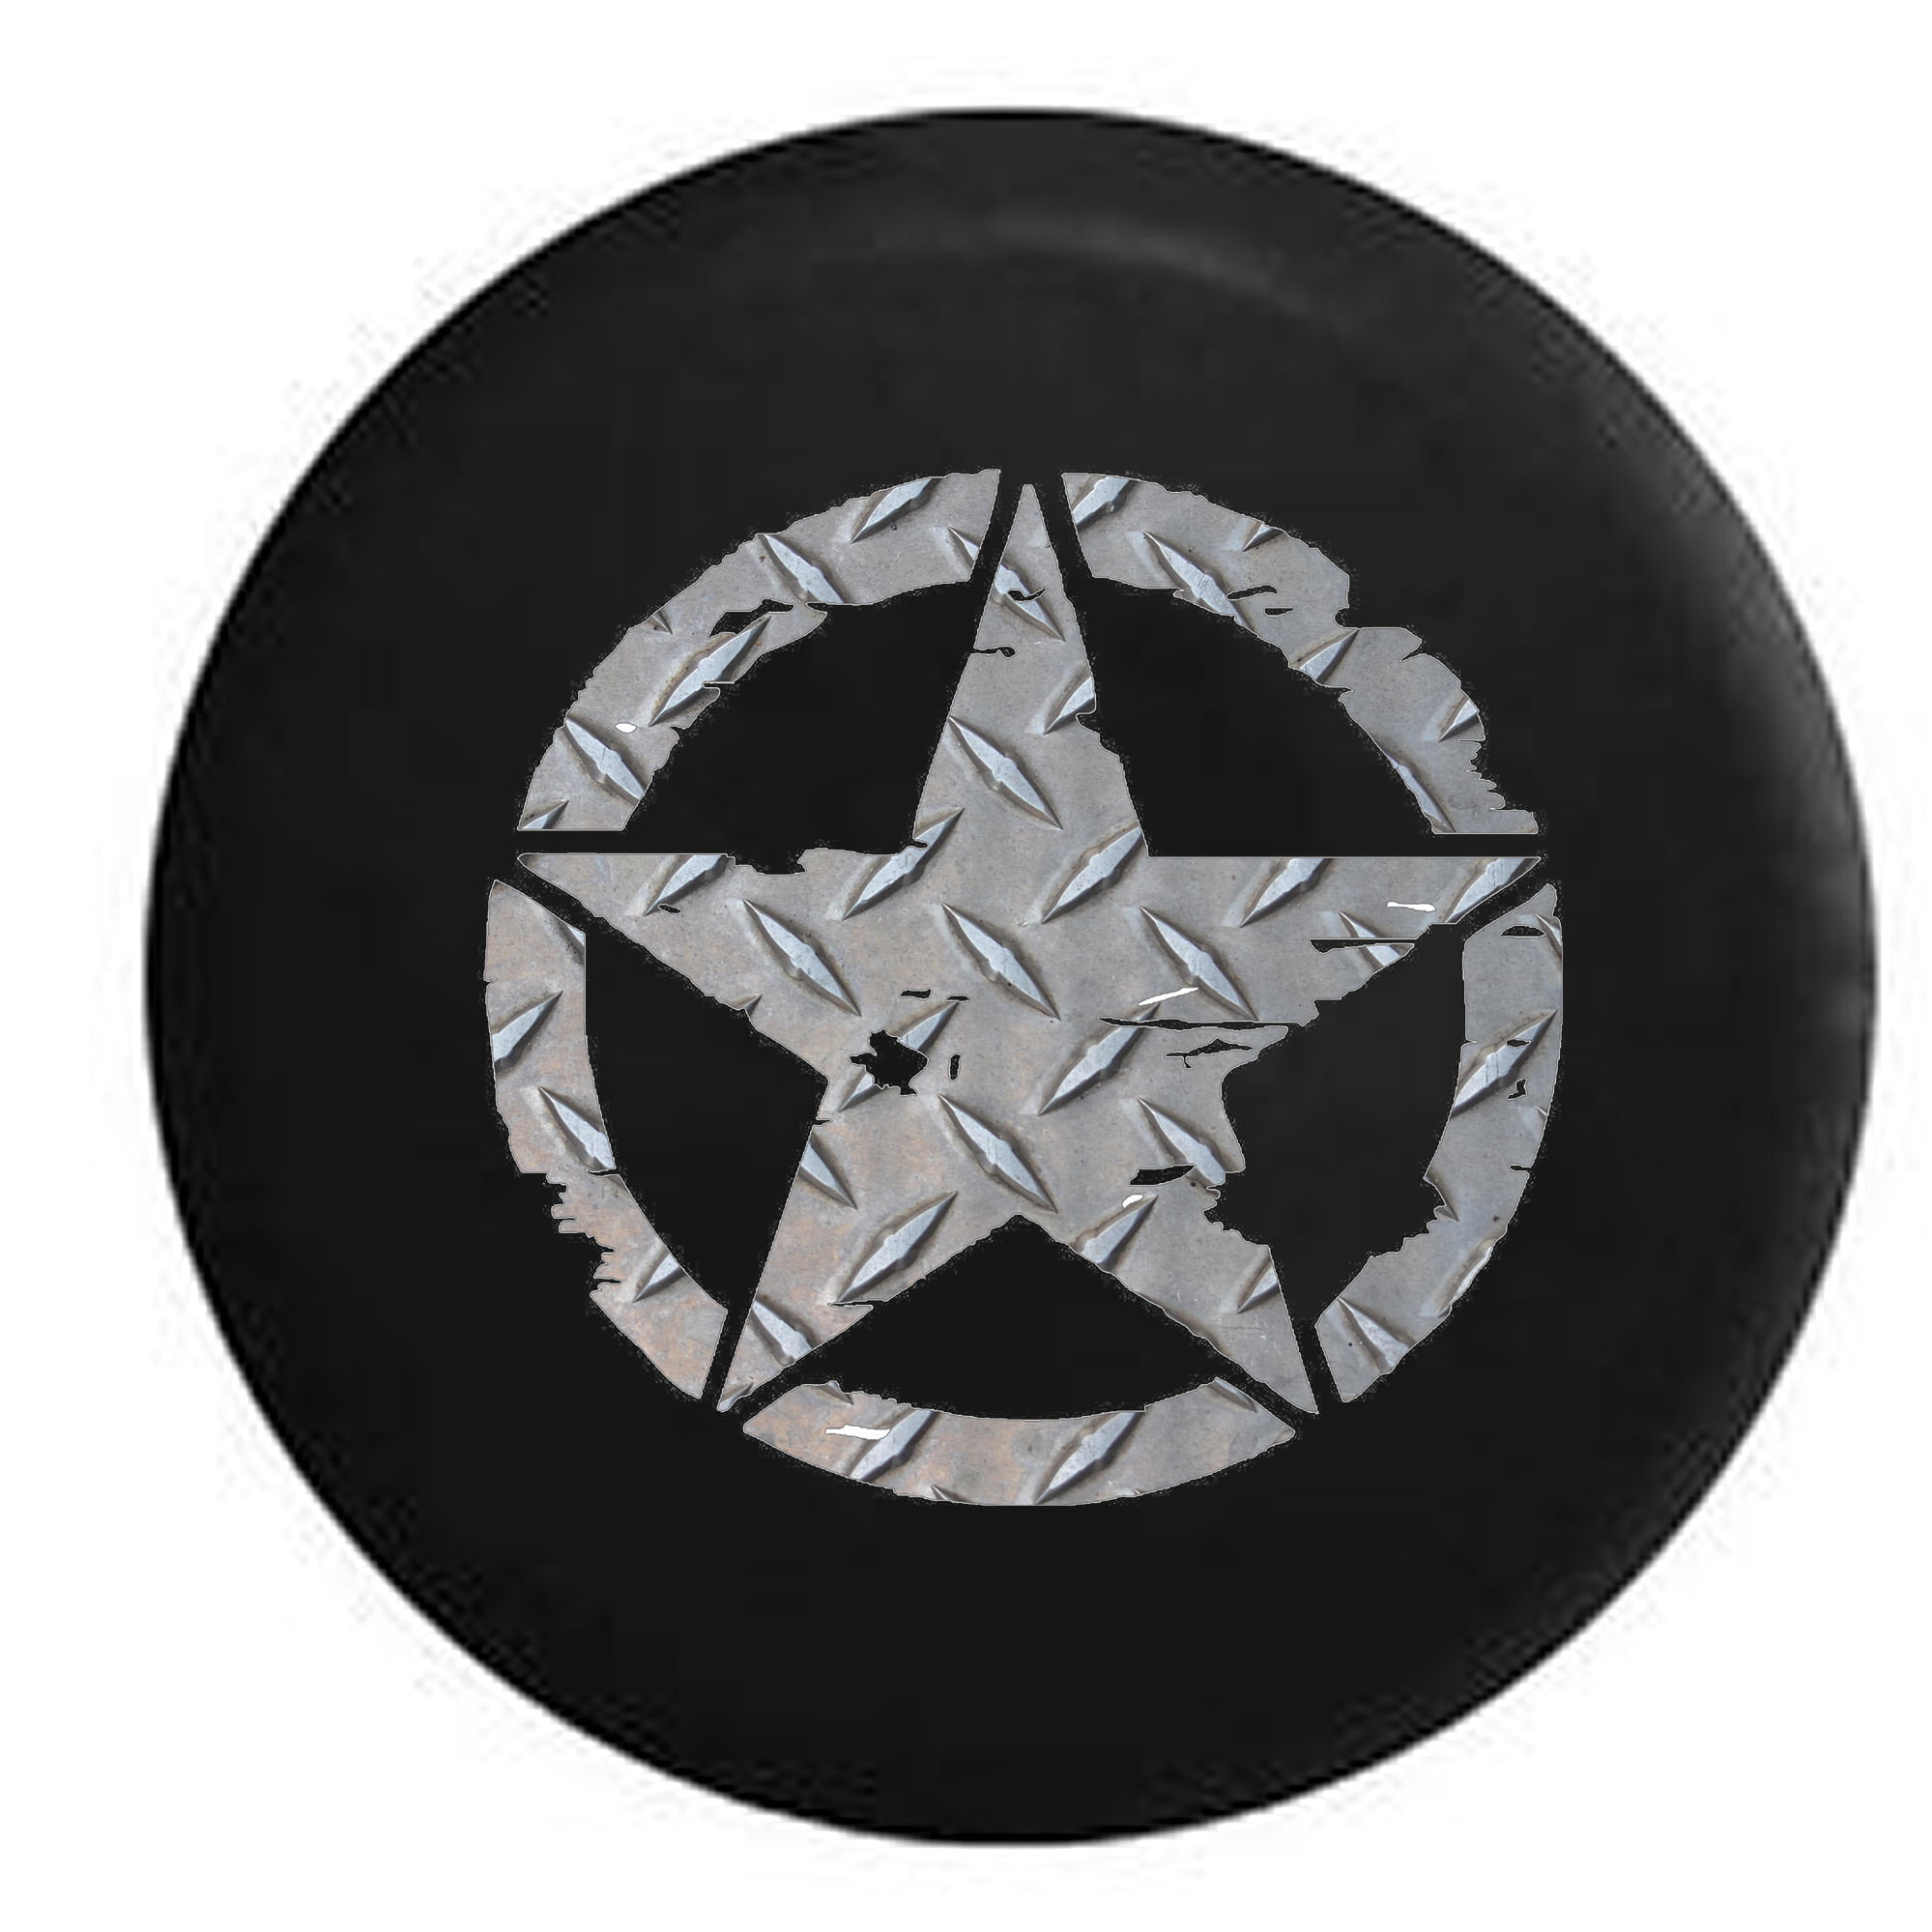 Pike Flag US Army Star Military Trailer RV Spare Tire Cover OEM Vinyl Black 29 in